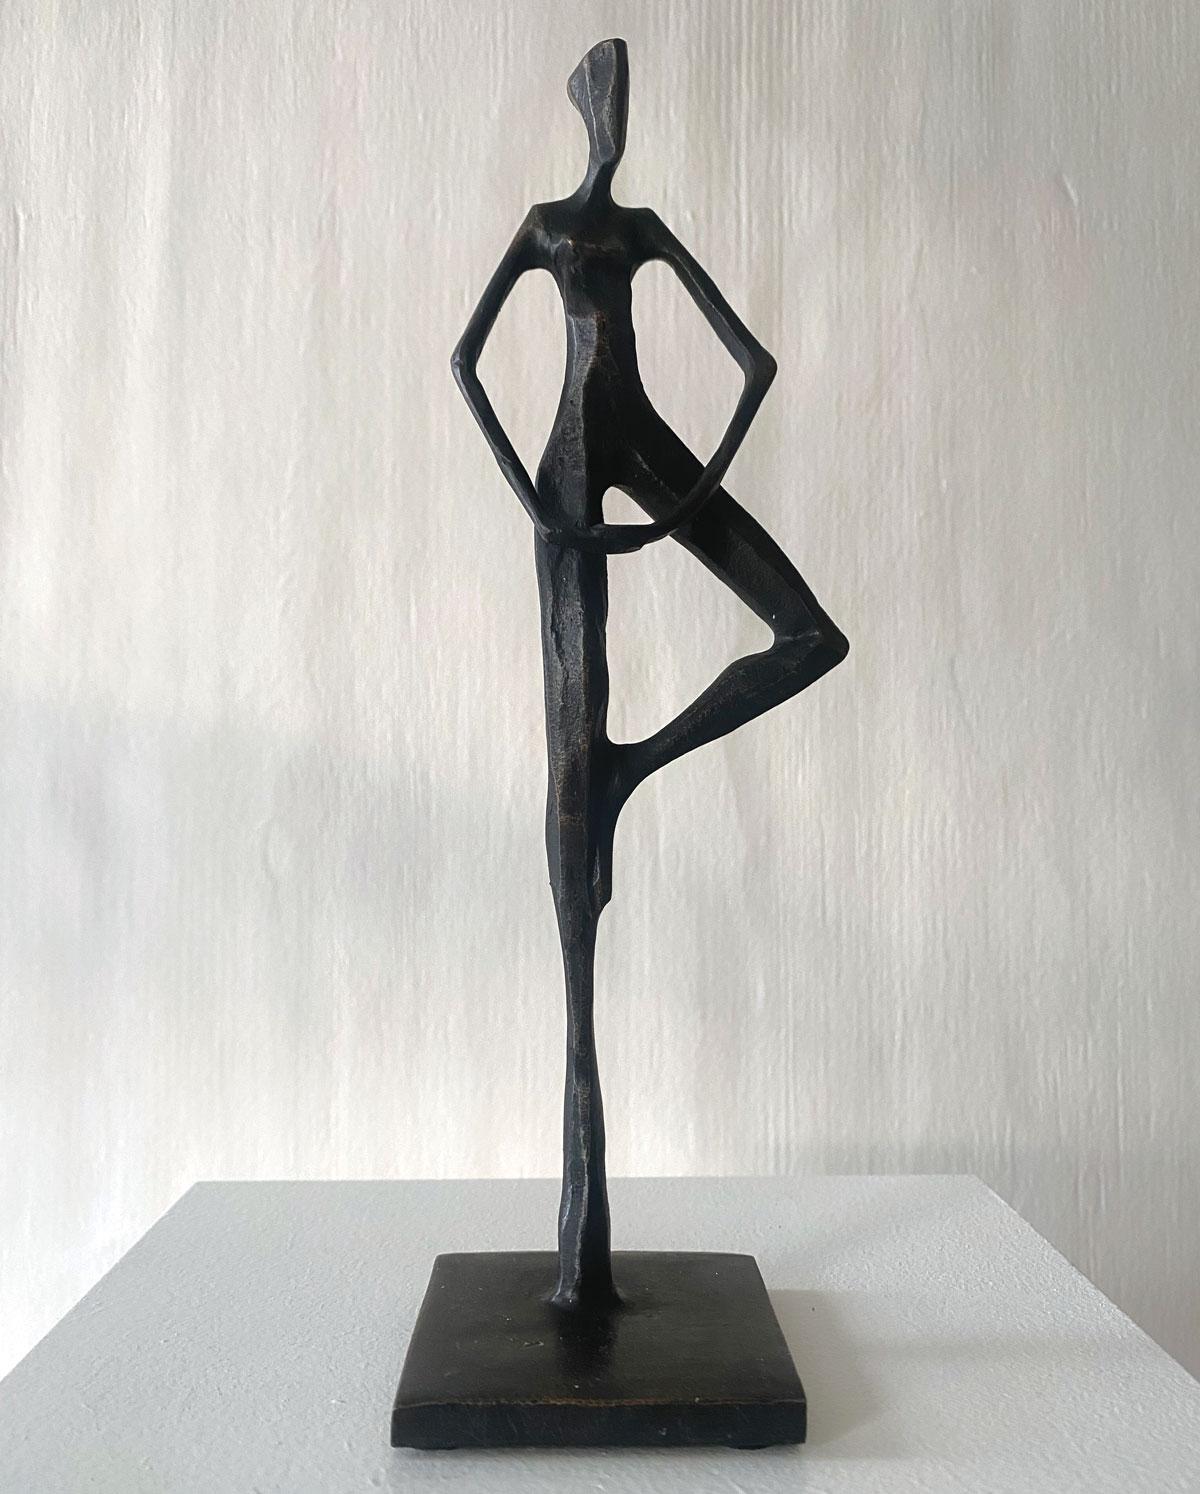 Maddison is an elegant figurative bronze sculpture by Nando Kallweit.

Modelled on modern youthful postures but with a nod to the importance of heritage through the stylised Egyptian-influenced head. A lovely piece on its own or with a group of